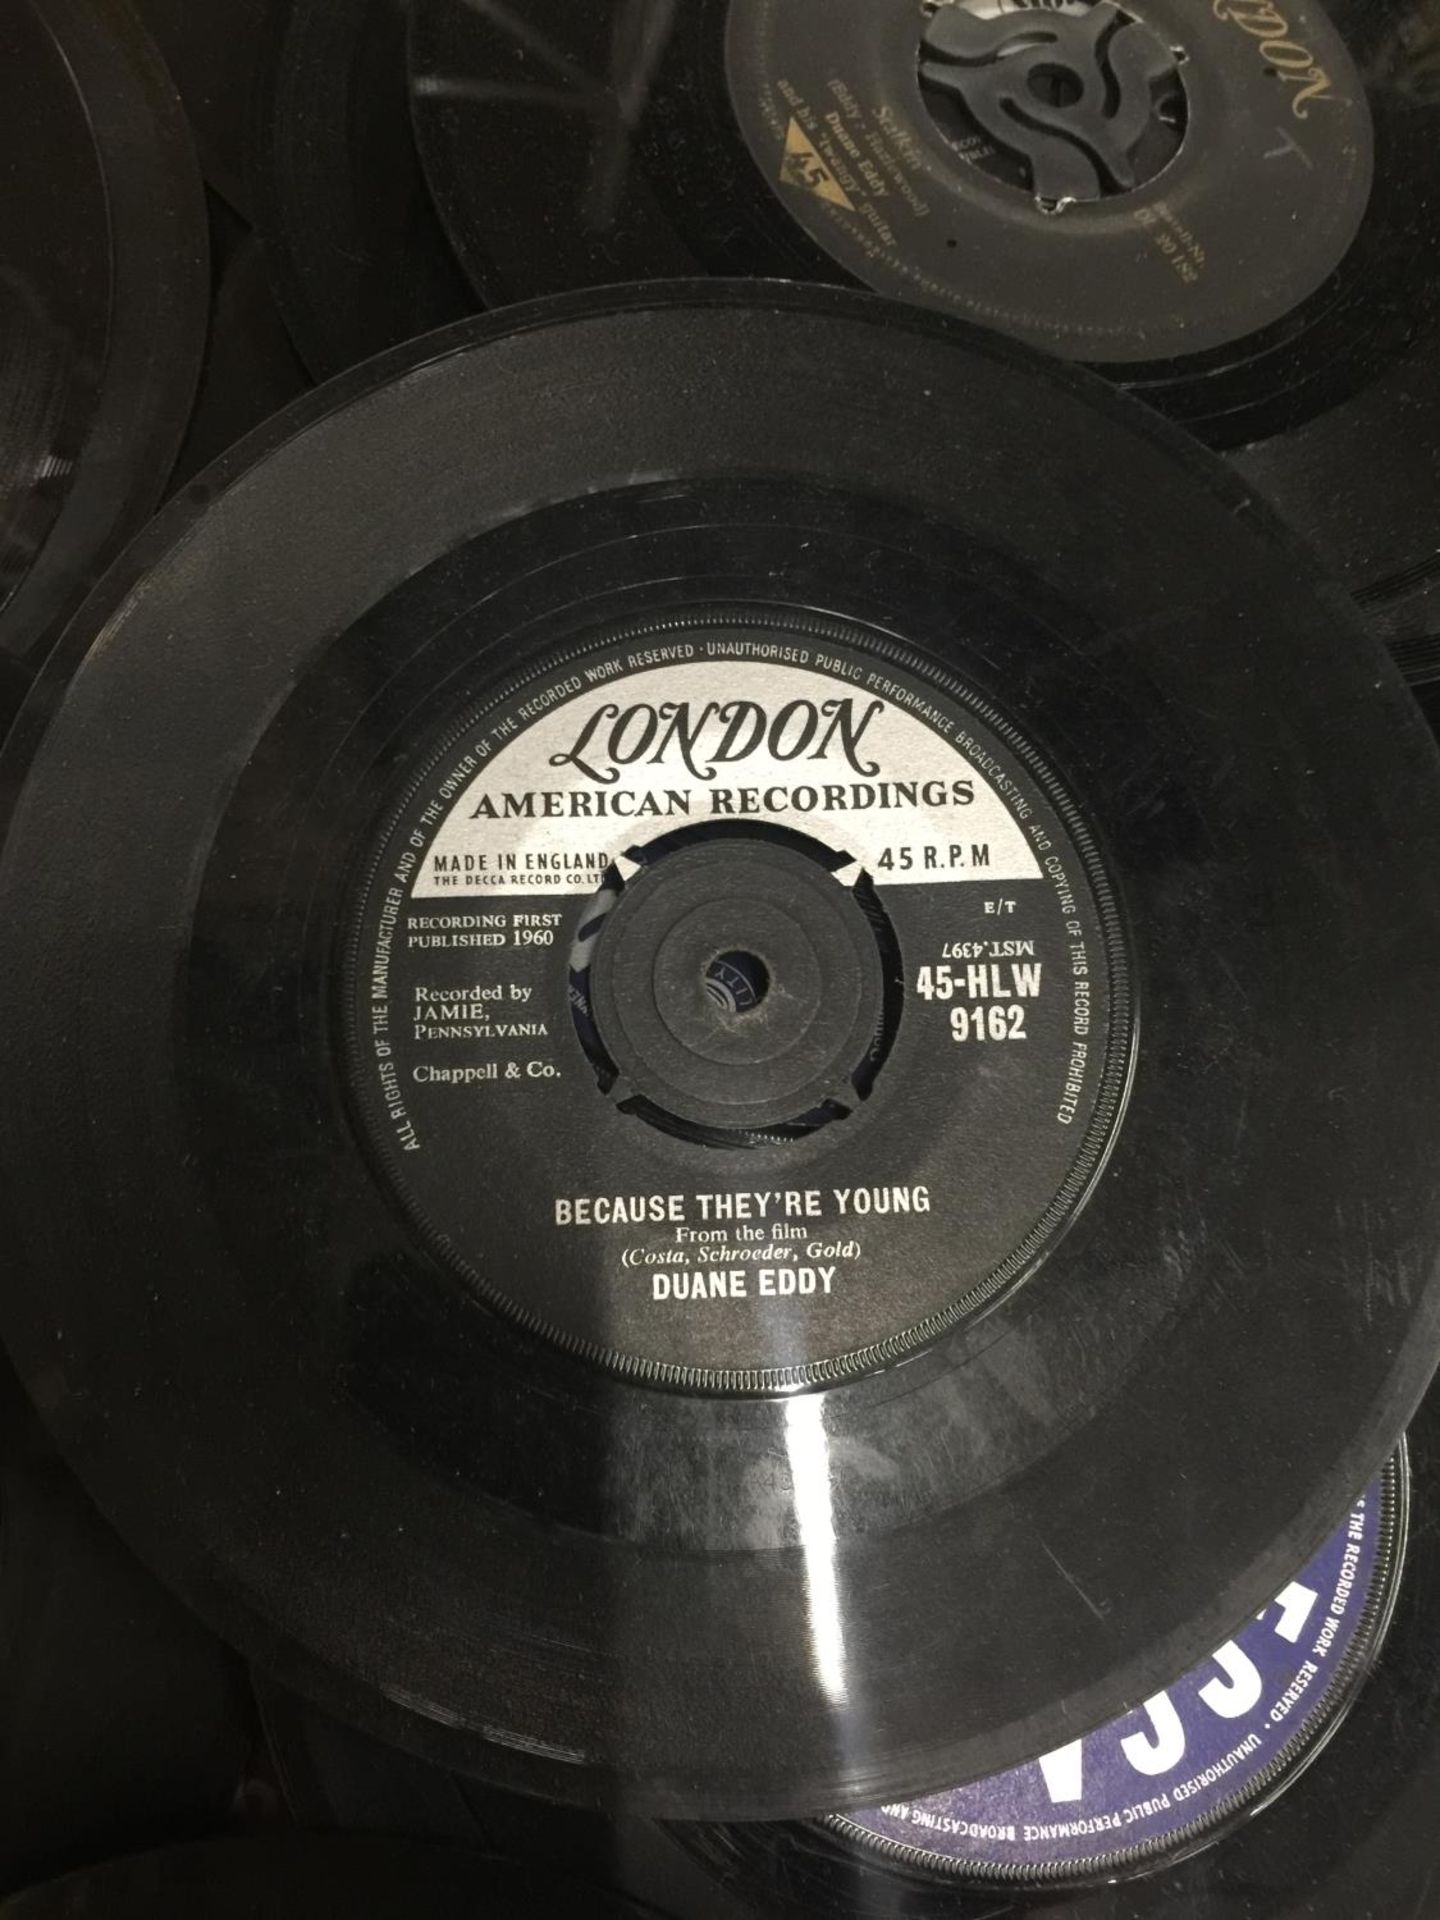 A LARGE COLLECTION OF VINTAGE VINYL SINGLE RECORDS TO INCLUDE THE HOLLIES, DUANE EDDY, THE EVERLY - Image 3 of 3